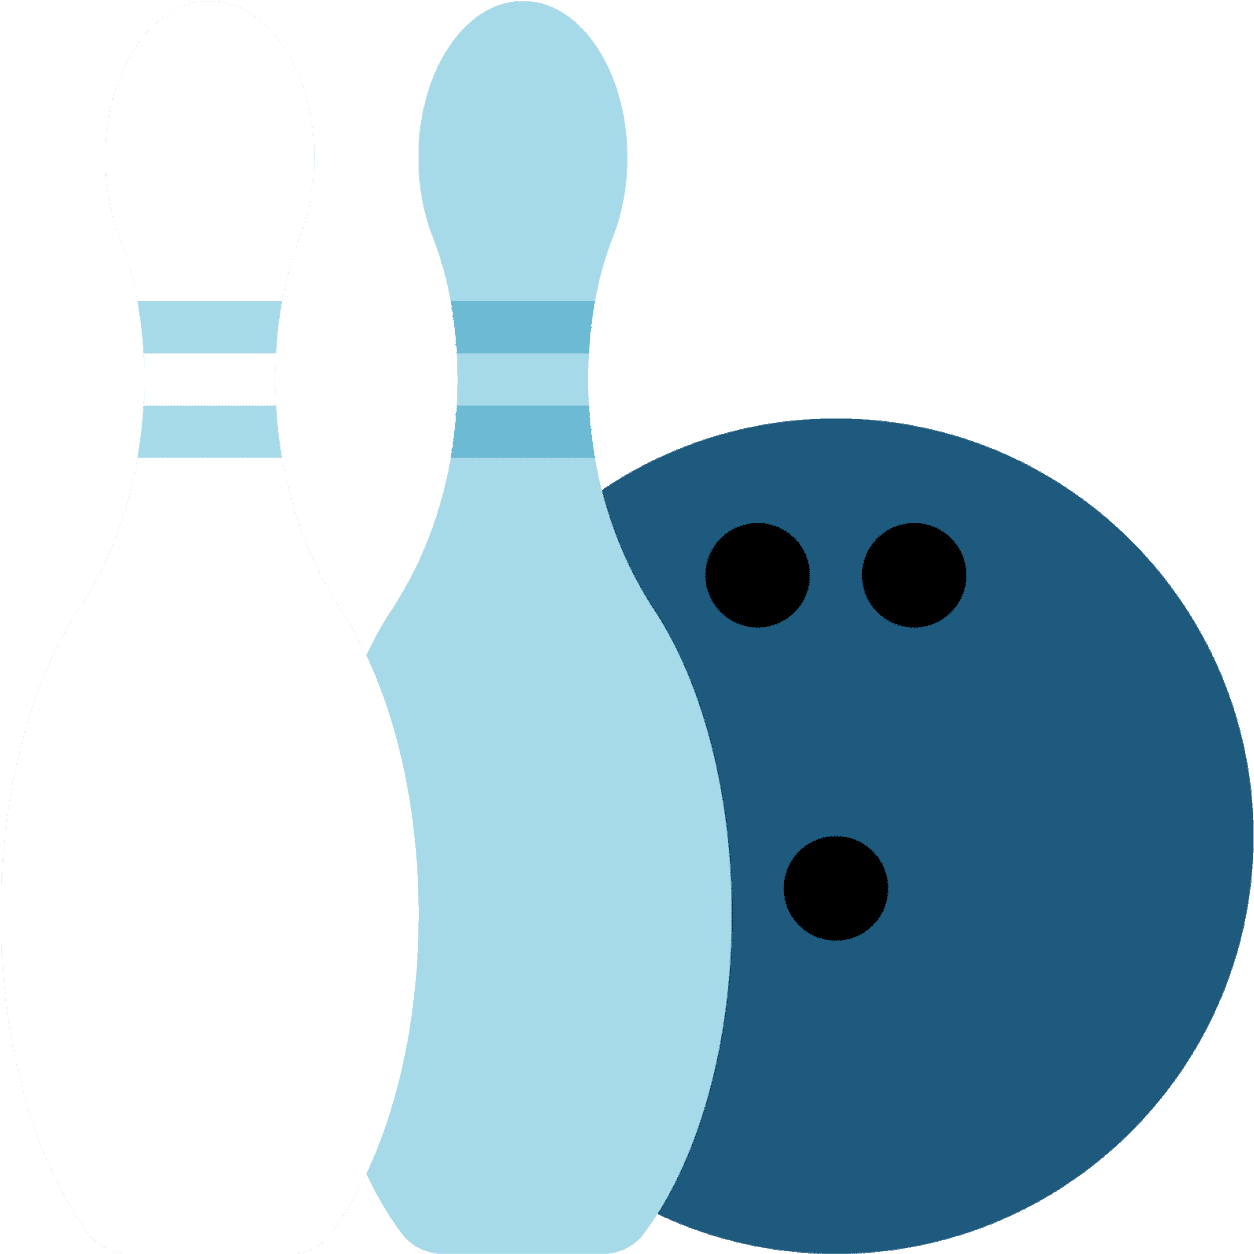 Bowling Pinsand Ball Graphic PNG image